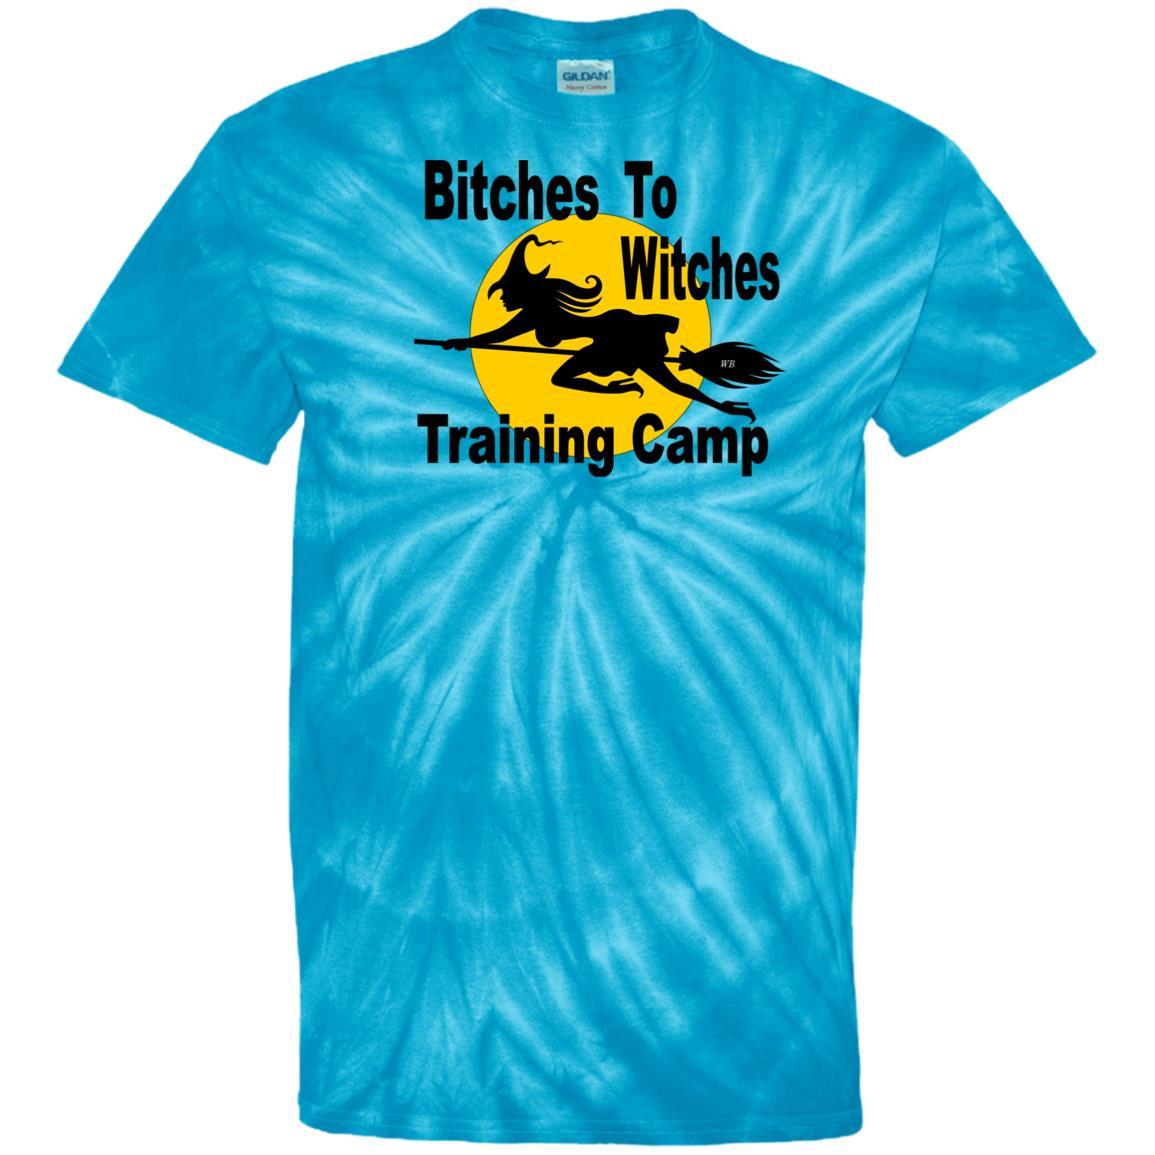 T-Shirts SpiderTurquoise / S WineyBitches.Co "Bitches To Witches Training Camp" - 100% Cotton Tie Dye T-Shirt WineyBitchesCo